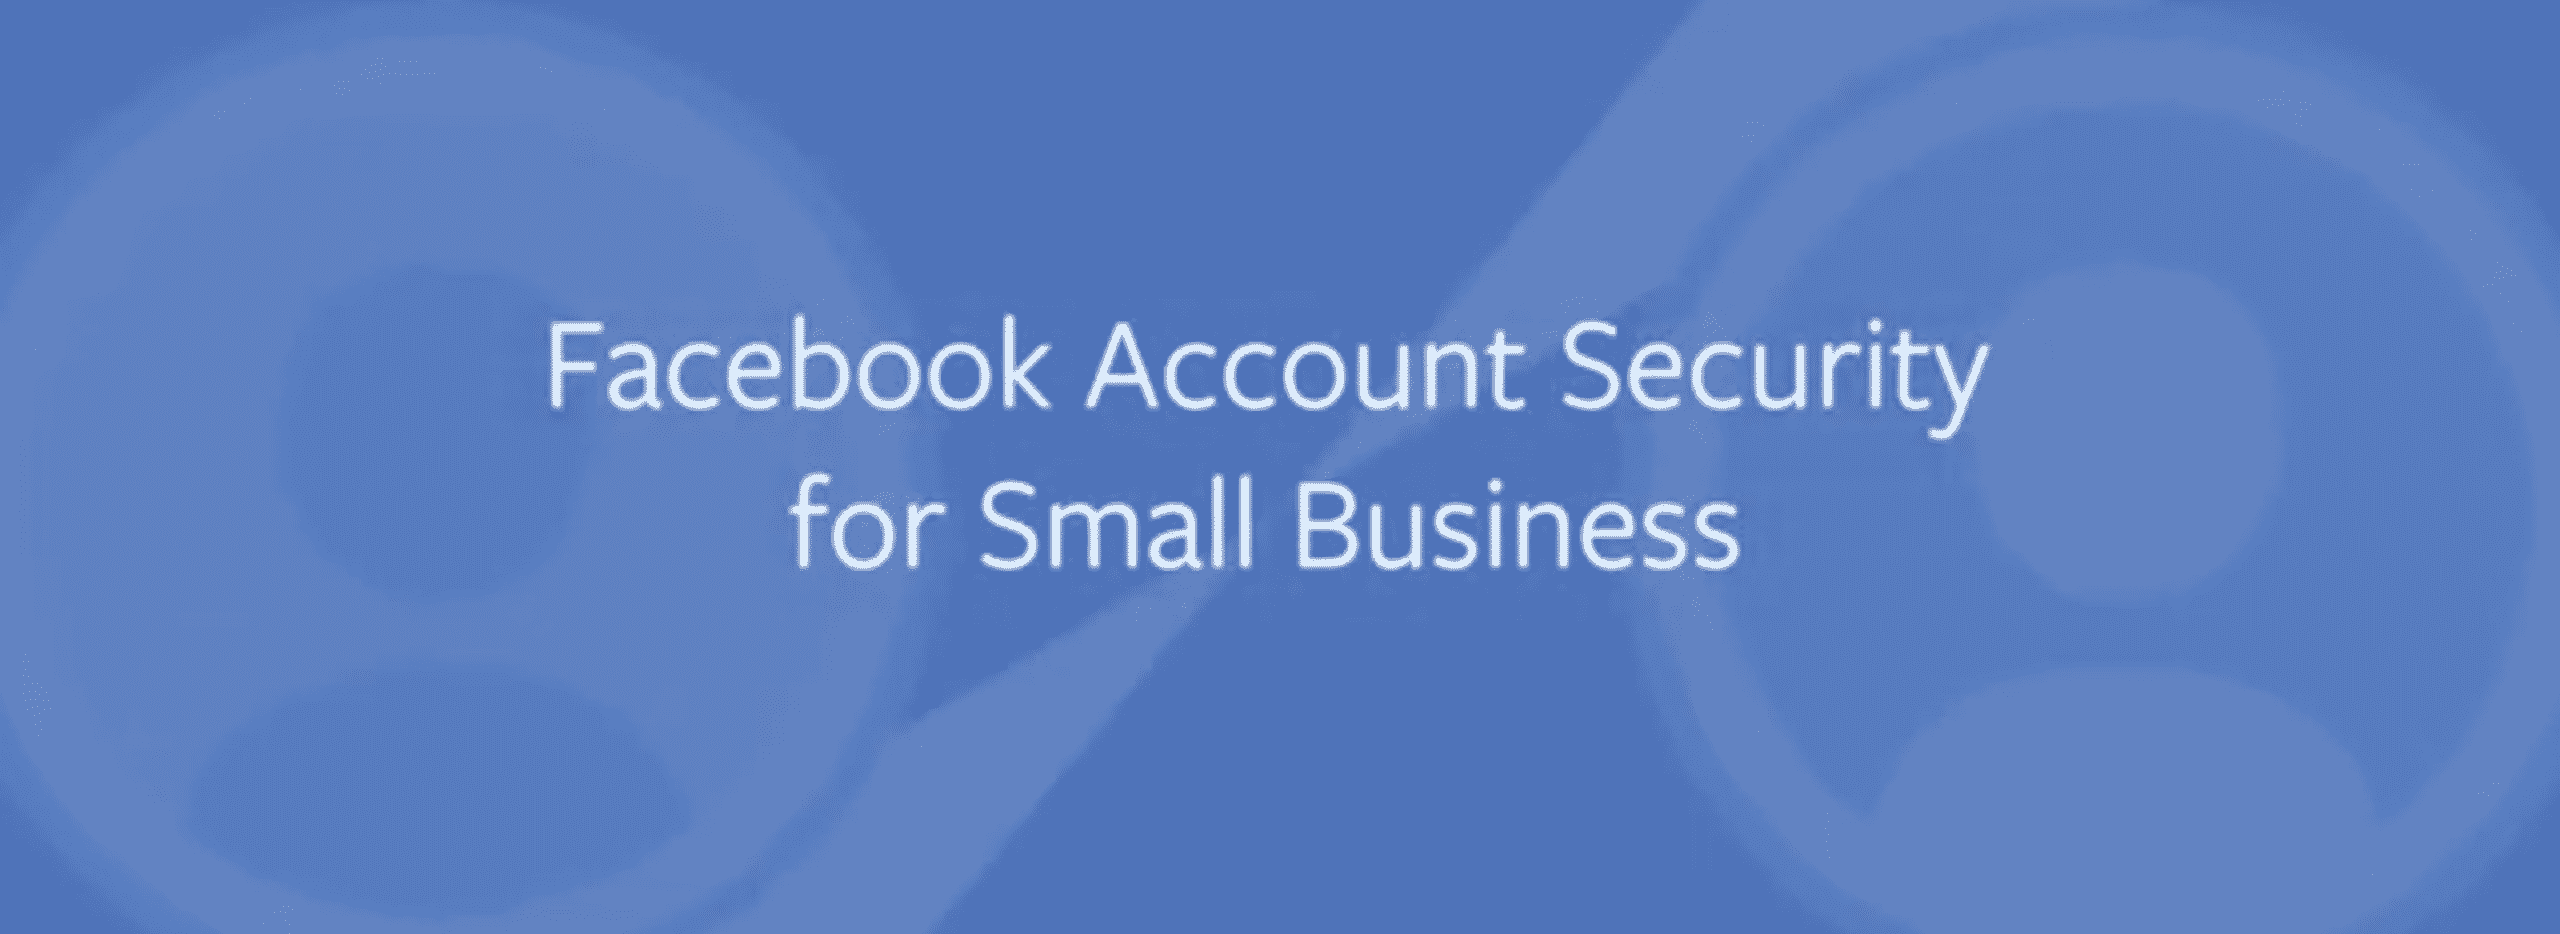 Facebook Account Security for Small Businesses